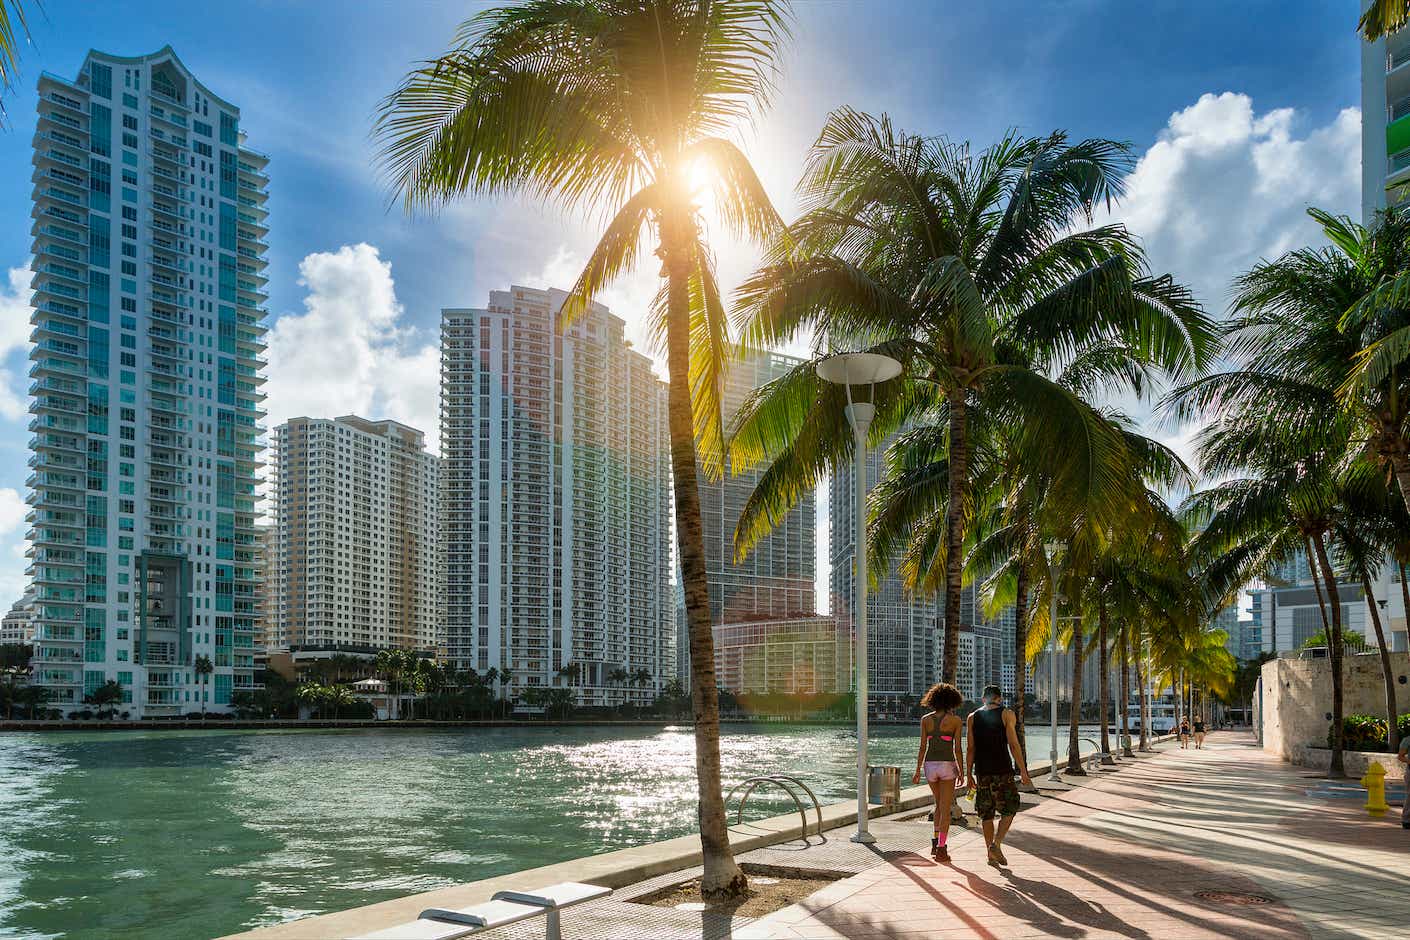 People flanked by palm trees walk alongside the Miami River during a sunny day; high rise buildings are in the background.